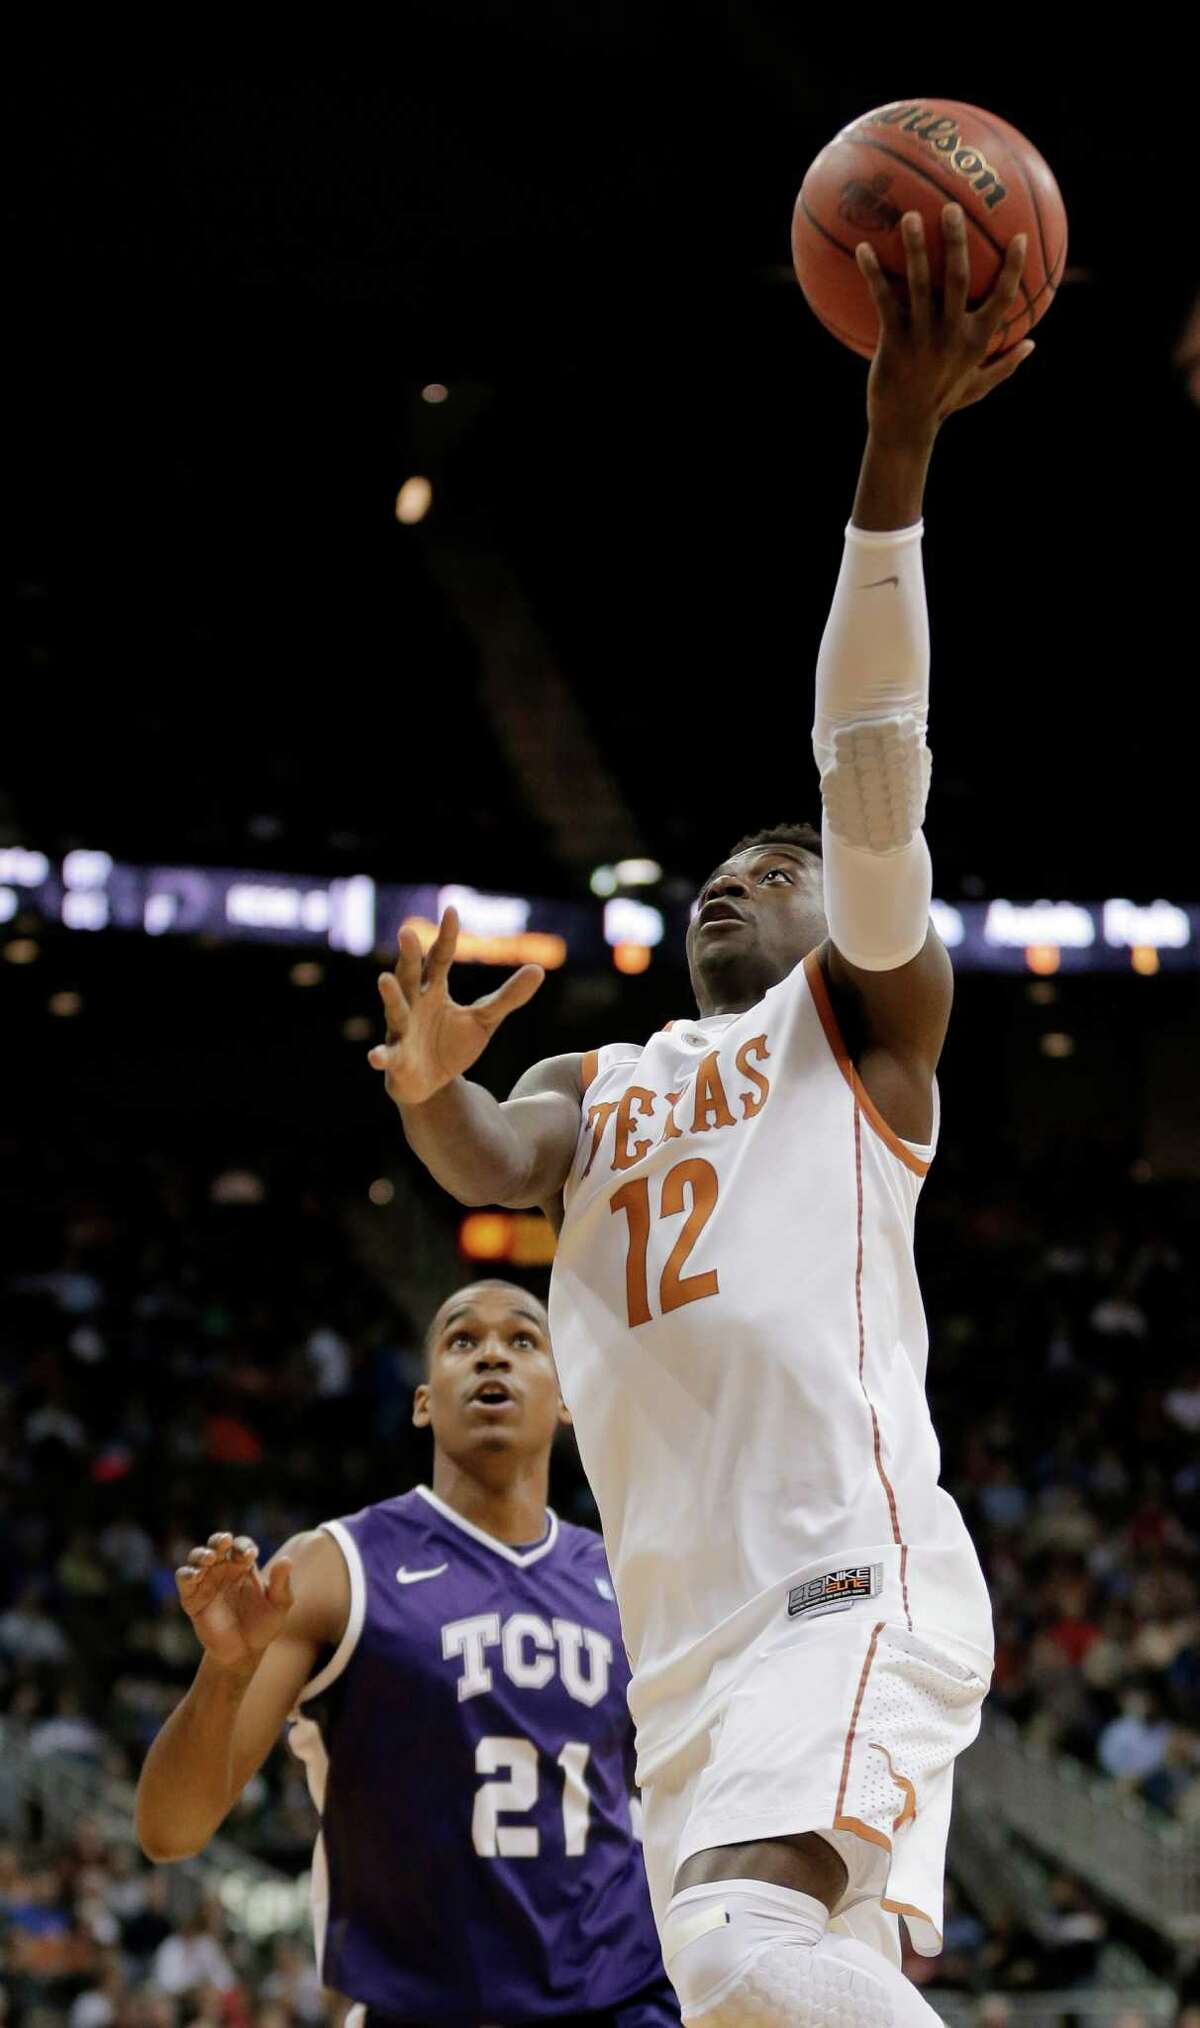 Texas guard Myck Kabongo (12) gets past TCU guard Nate Butler Lind (21) to put up a shot during the first half an NCAA college basketball game in the Big 12 men's tournament Wednesday, March 13, 2013, in Kansas City, Mo. (AP Photo/Charlie Riedel)